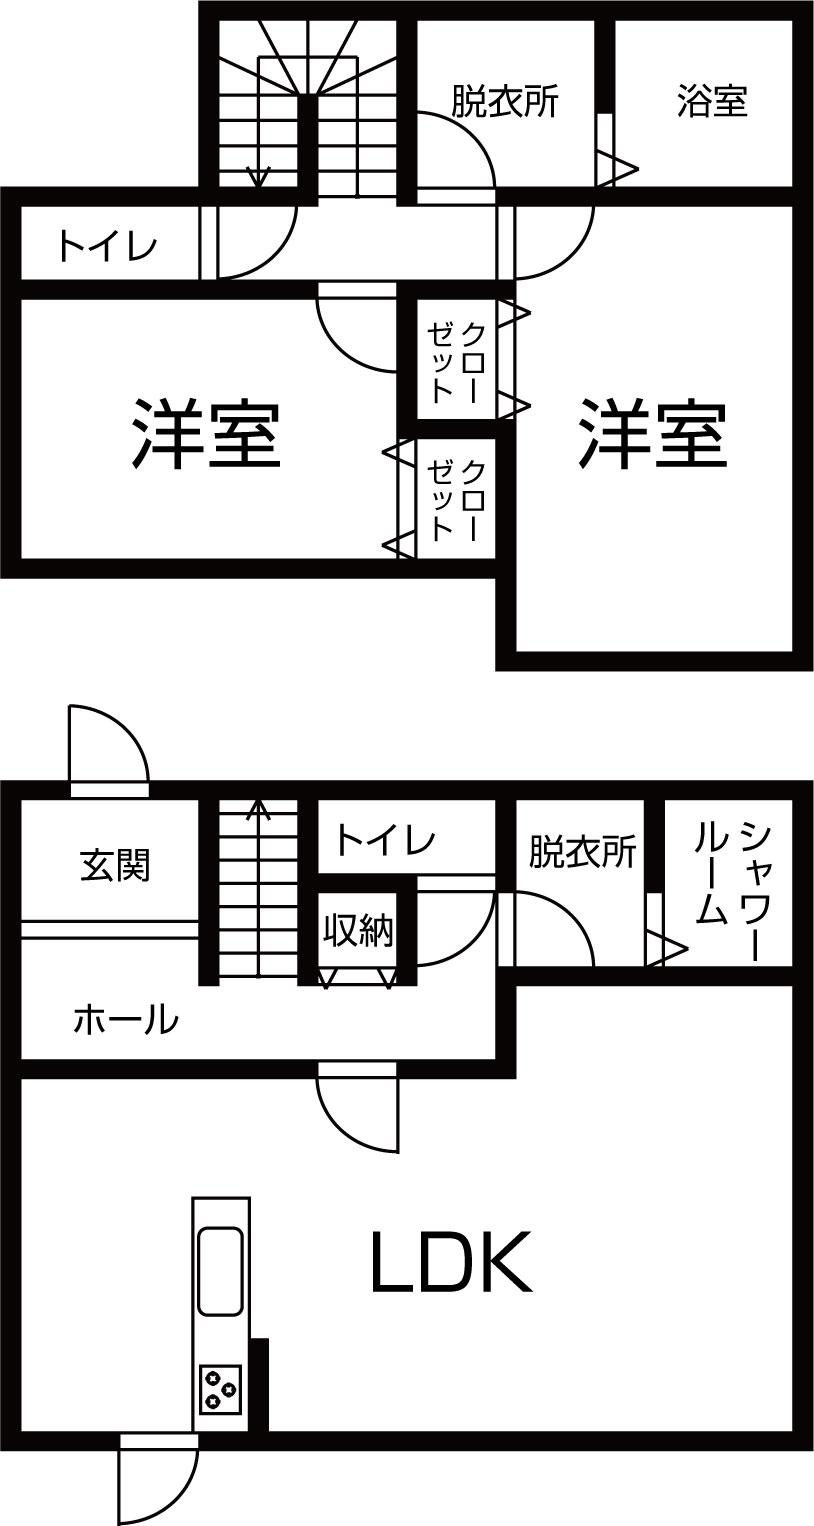 Floor plan. 16.8 million yen, 2LDK, Land area 150 sq m , Although building area 85.29 sq m 2LDK and smaller housing, It is enough for those who are less family number